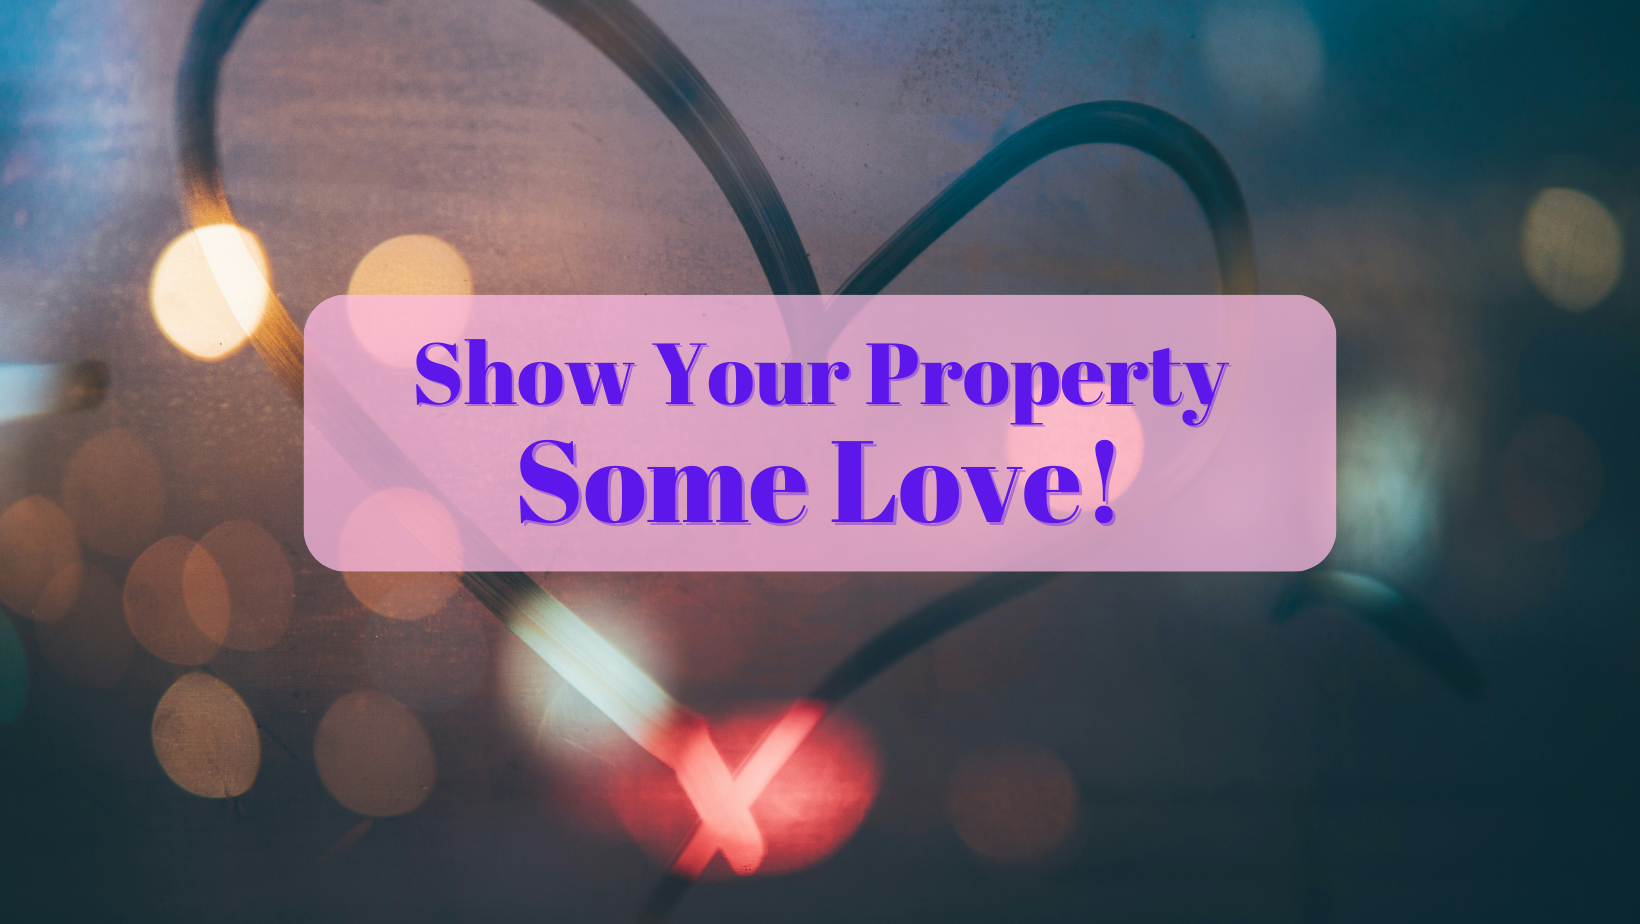 A photograph of a heart drawn in the condensation of a raining window with the text: Show Your Property Some Love!